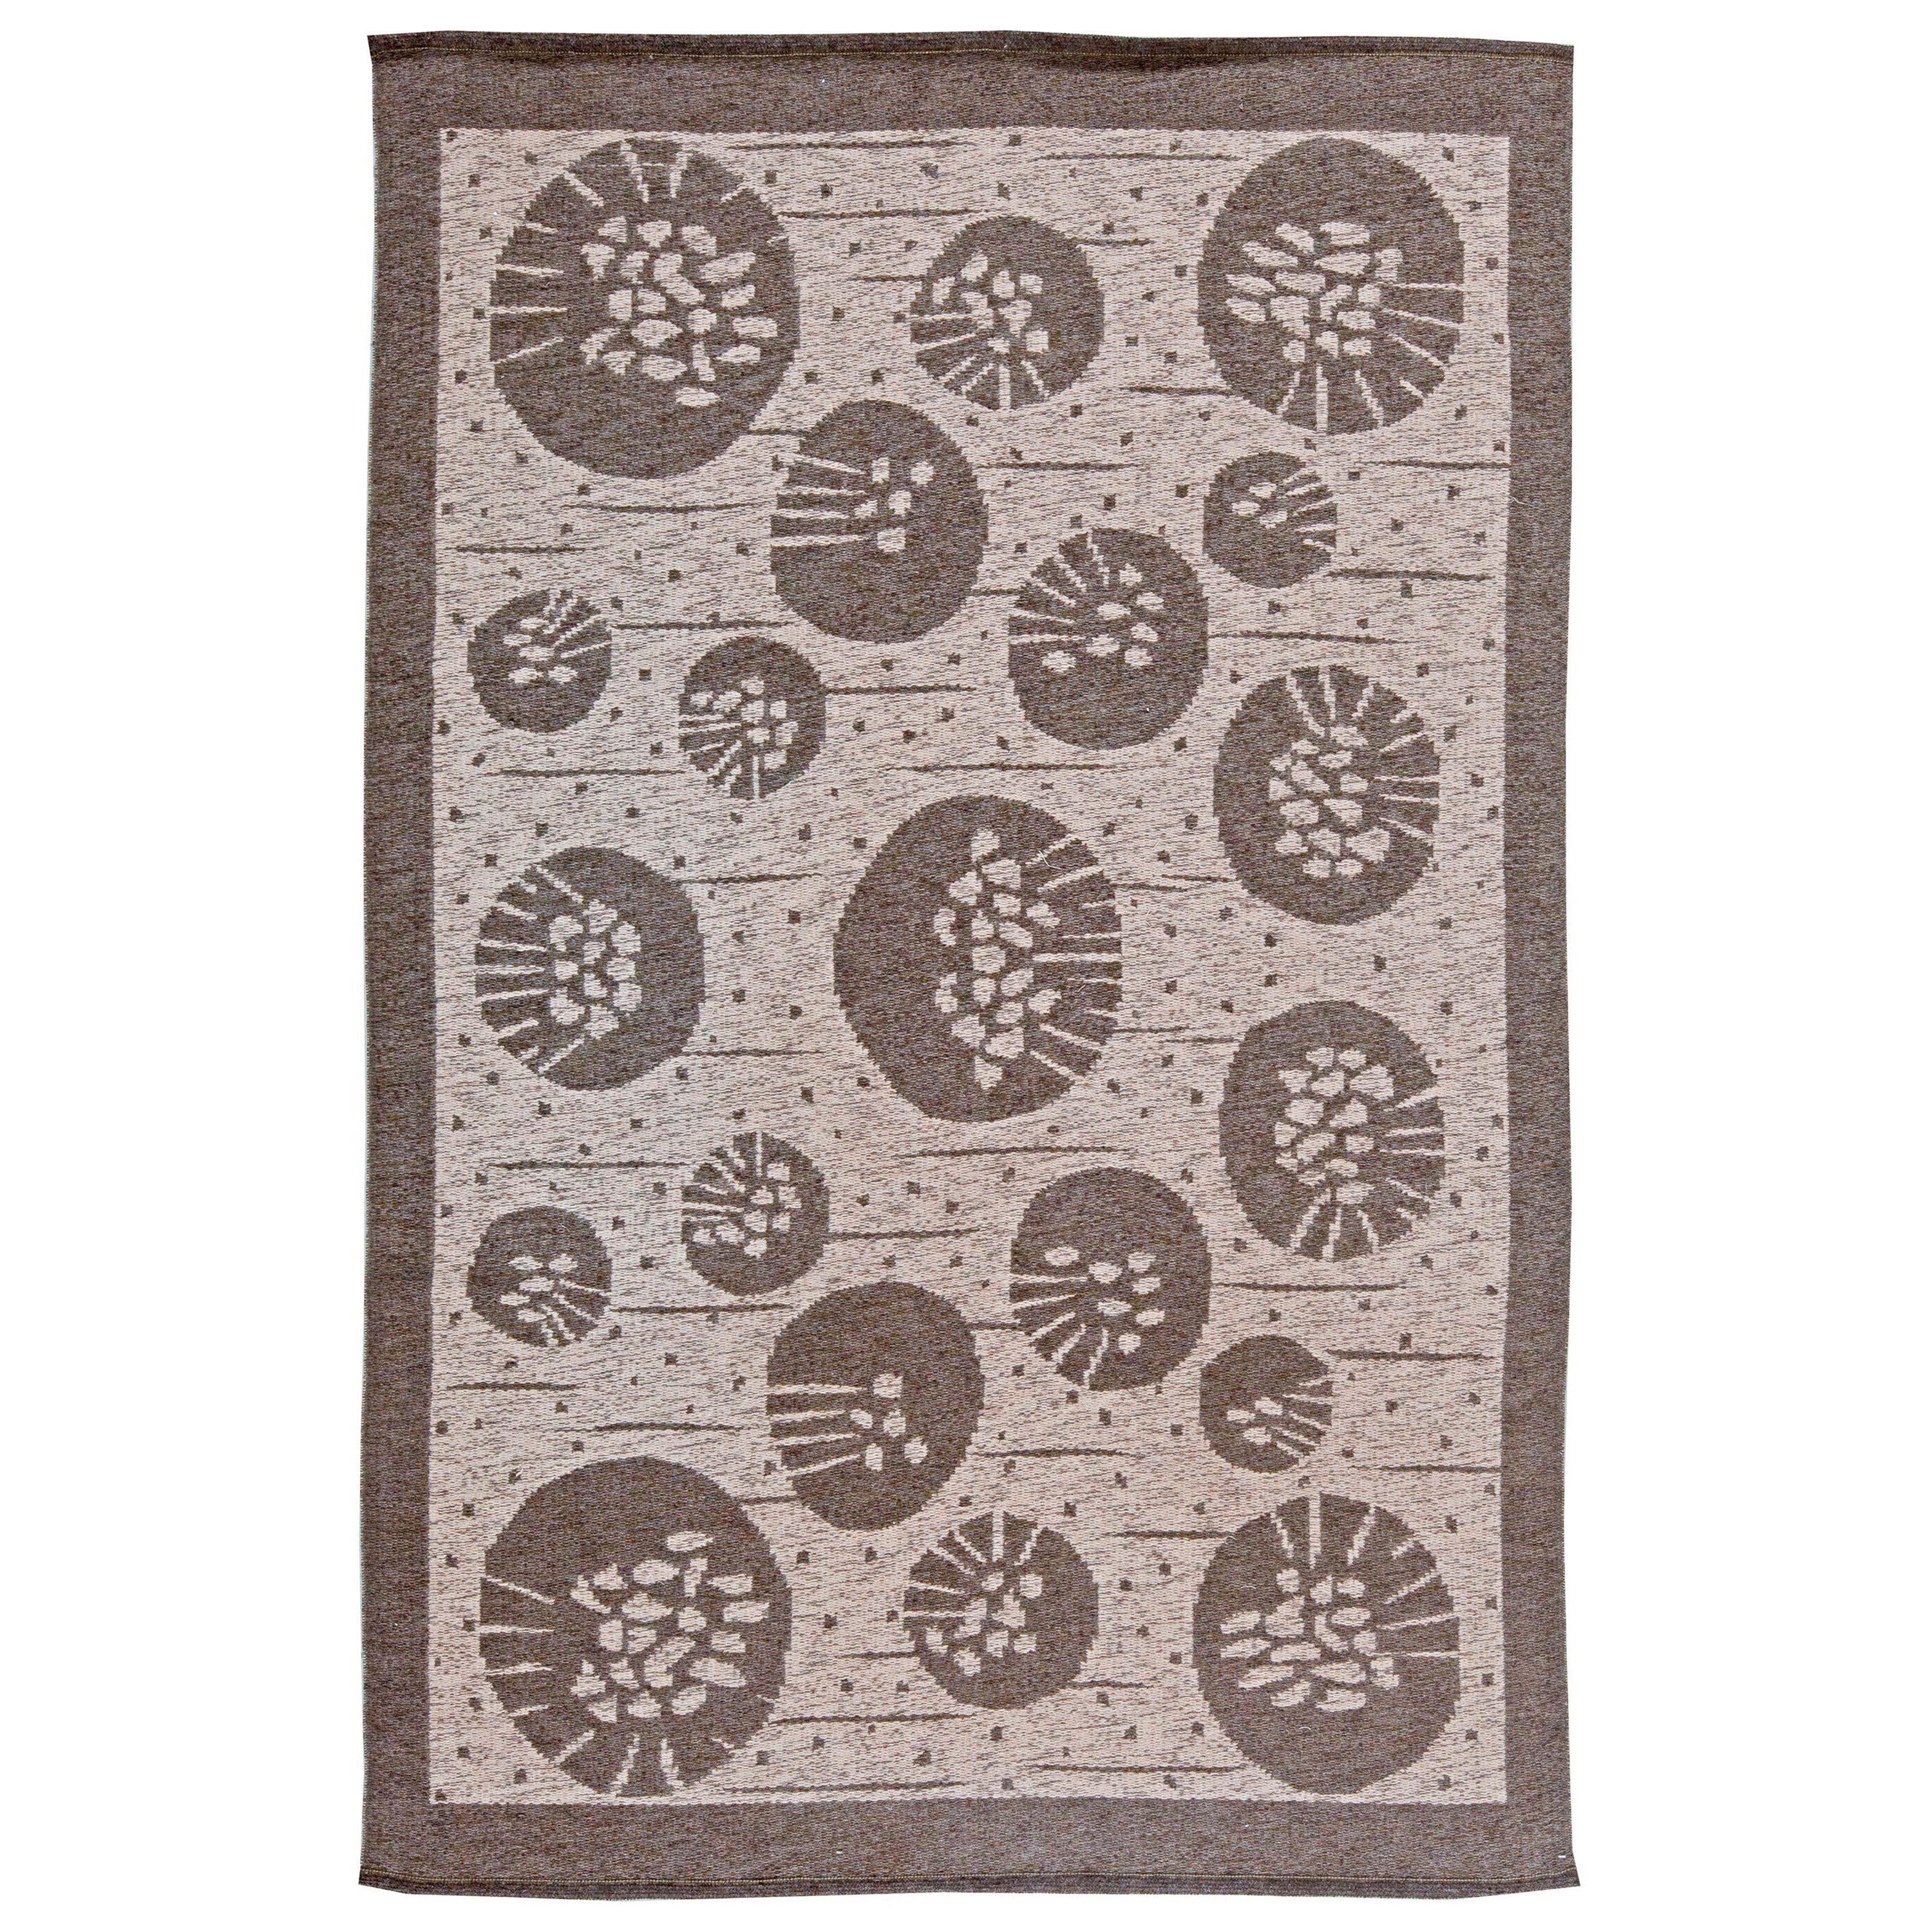 Midcentury Double Sided Swedish Flat-Weave Wool Rug by Orsa